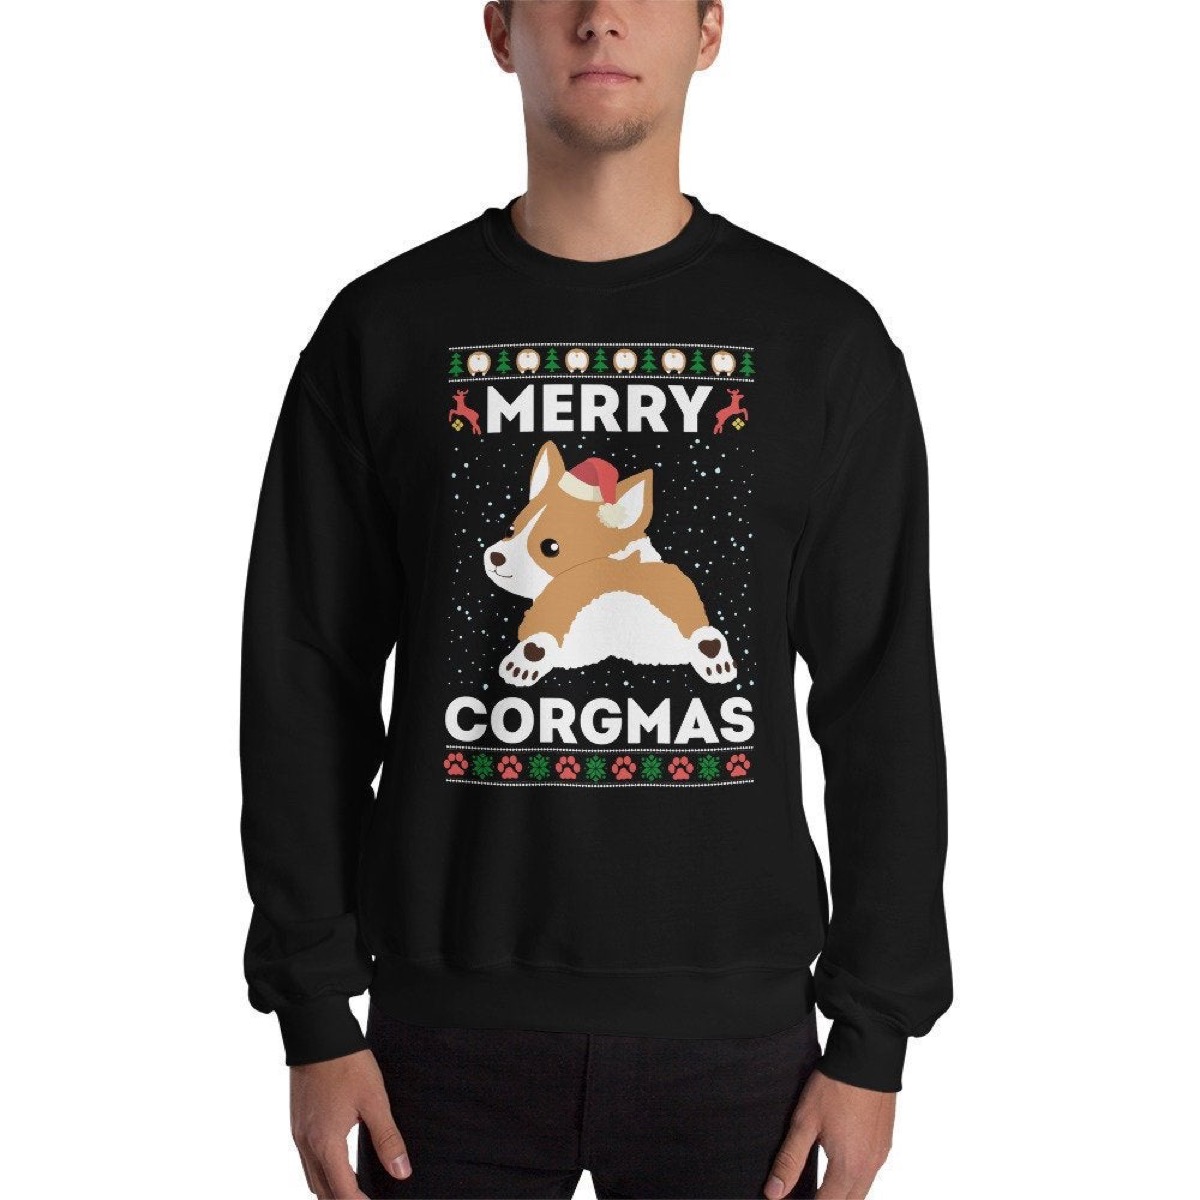 white man wearing black sweater with "merry corgmas" on it